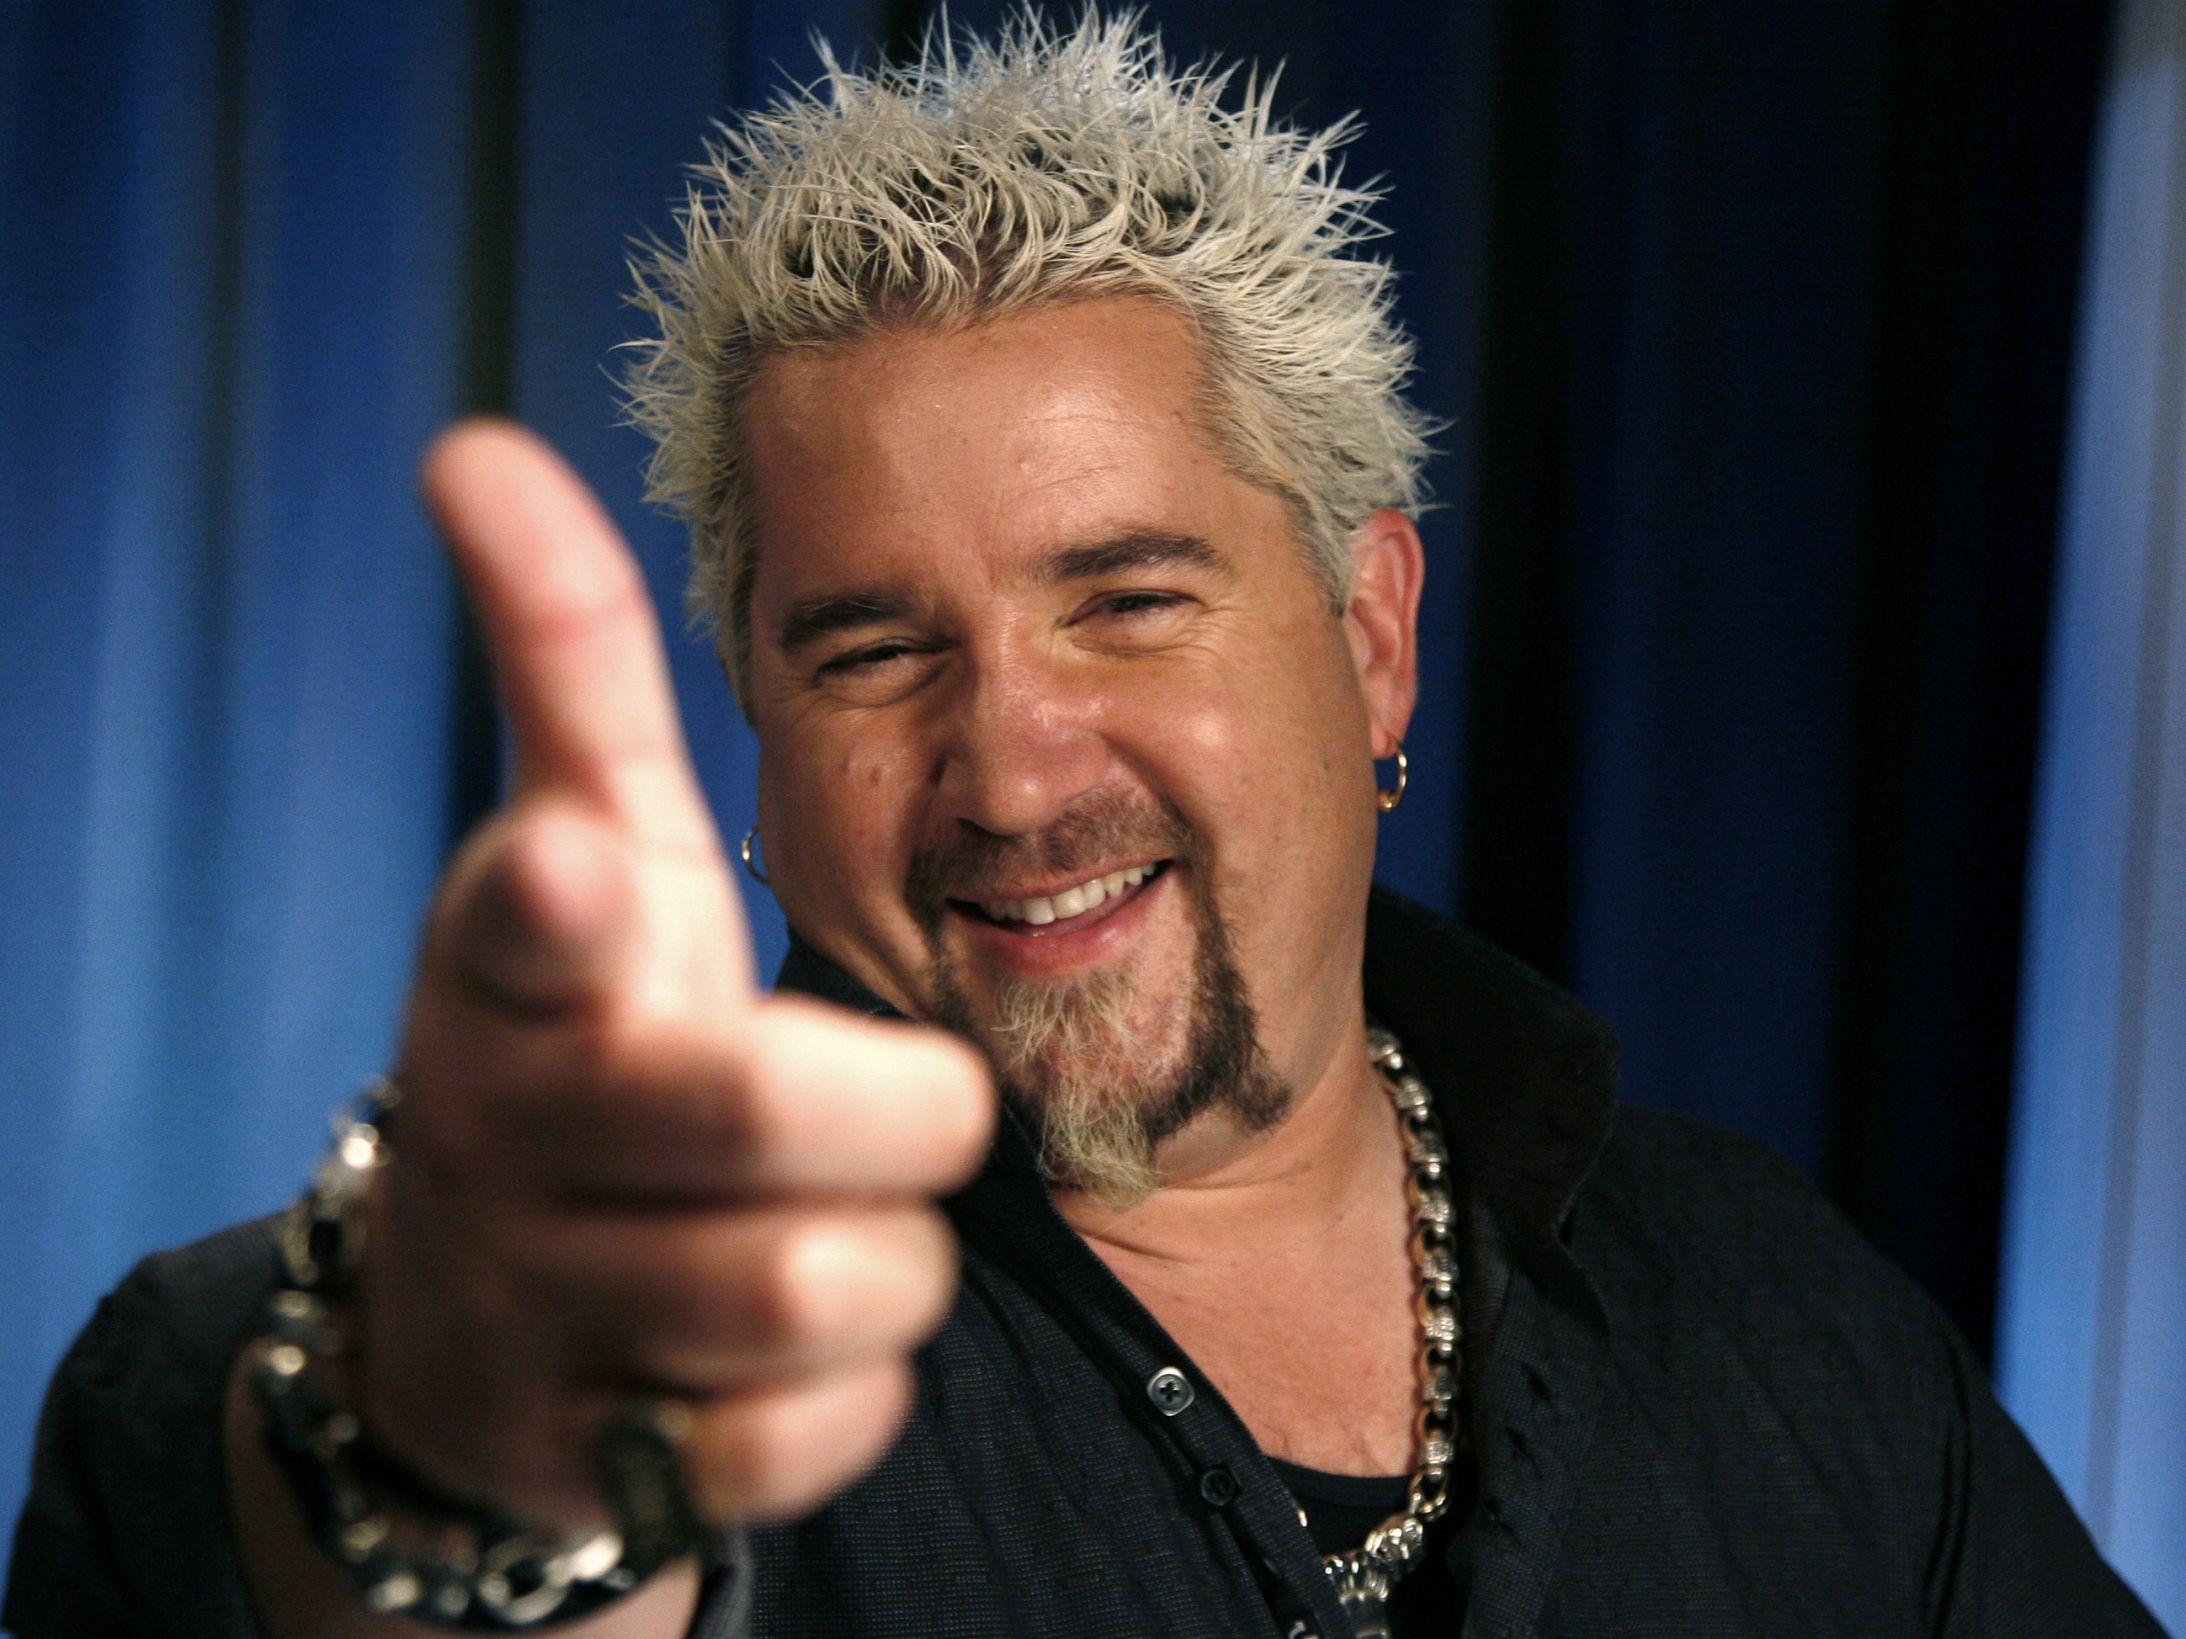 High Quality One Way ticket to flavor town Blank Meme Template